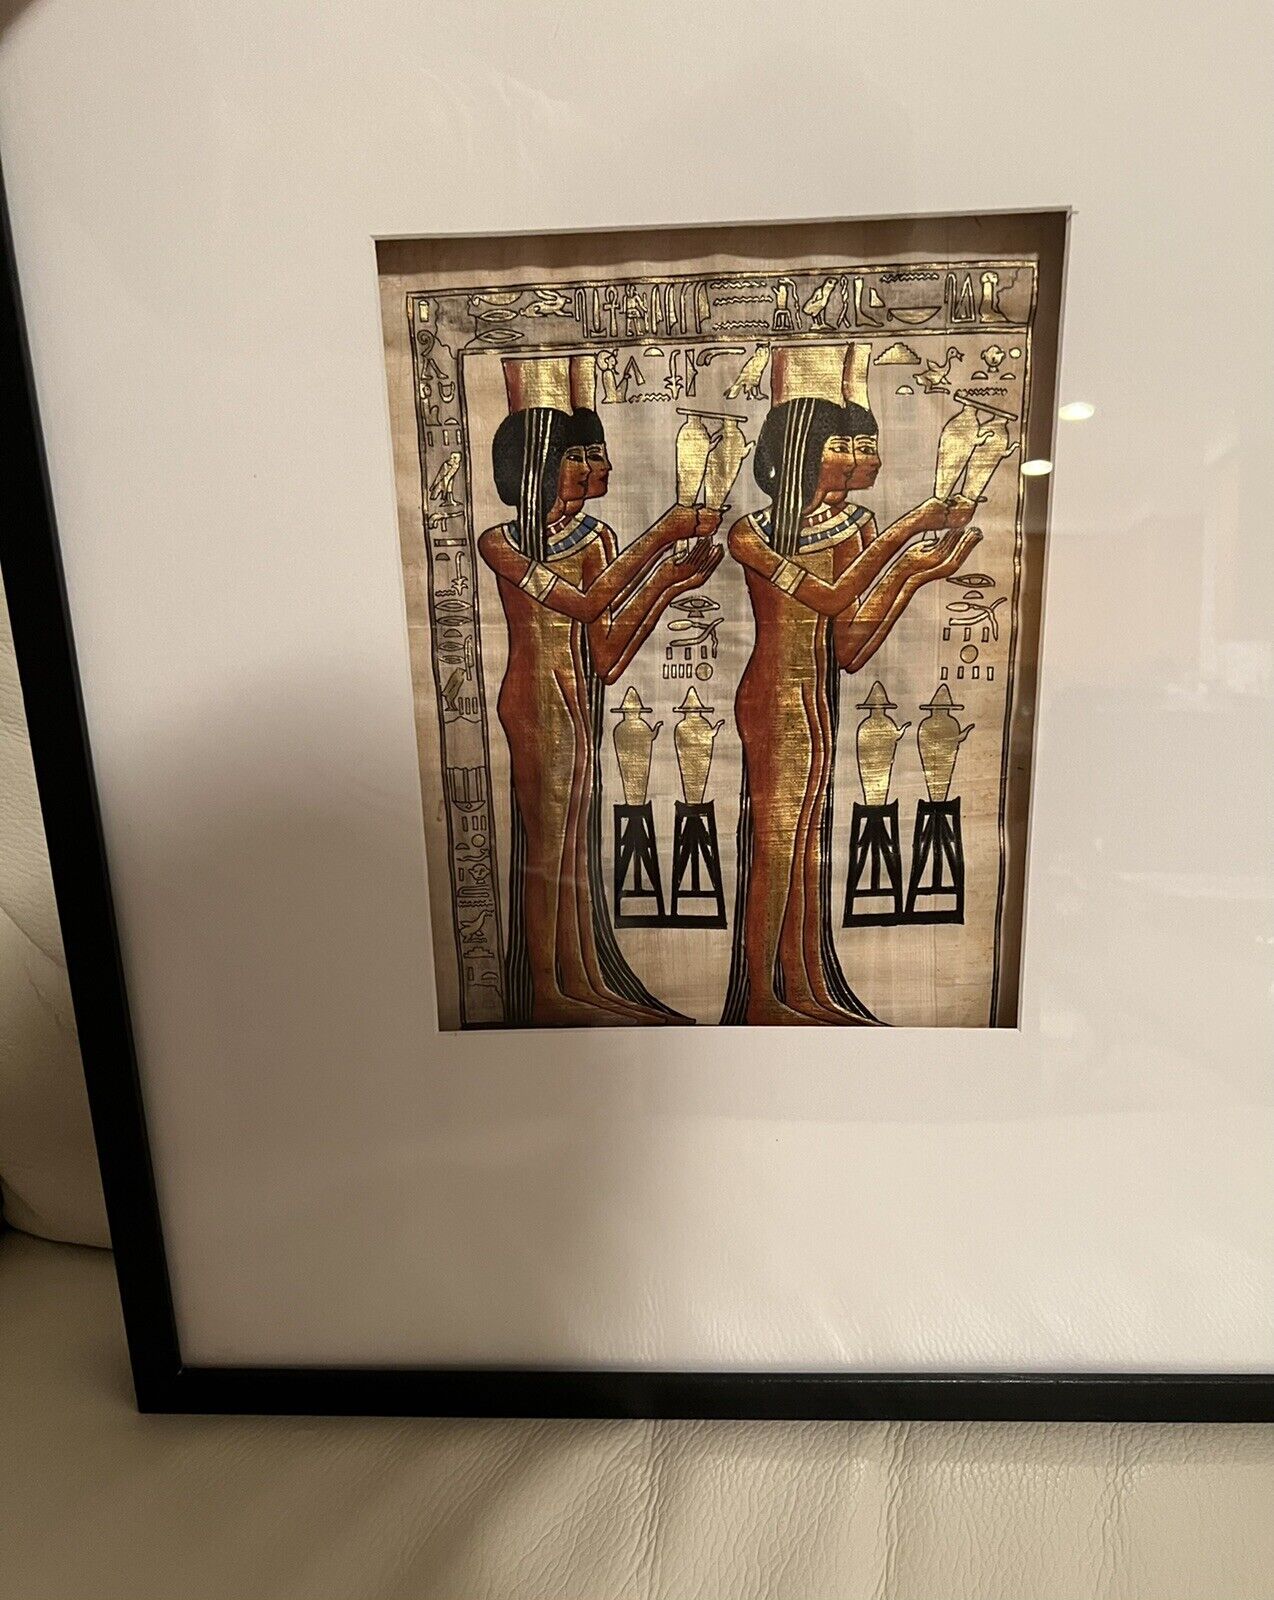 21”x17”  Framed Hand Painted Ancient Egyptian Papyrus,  Replica From Pyramids